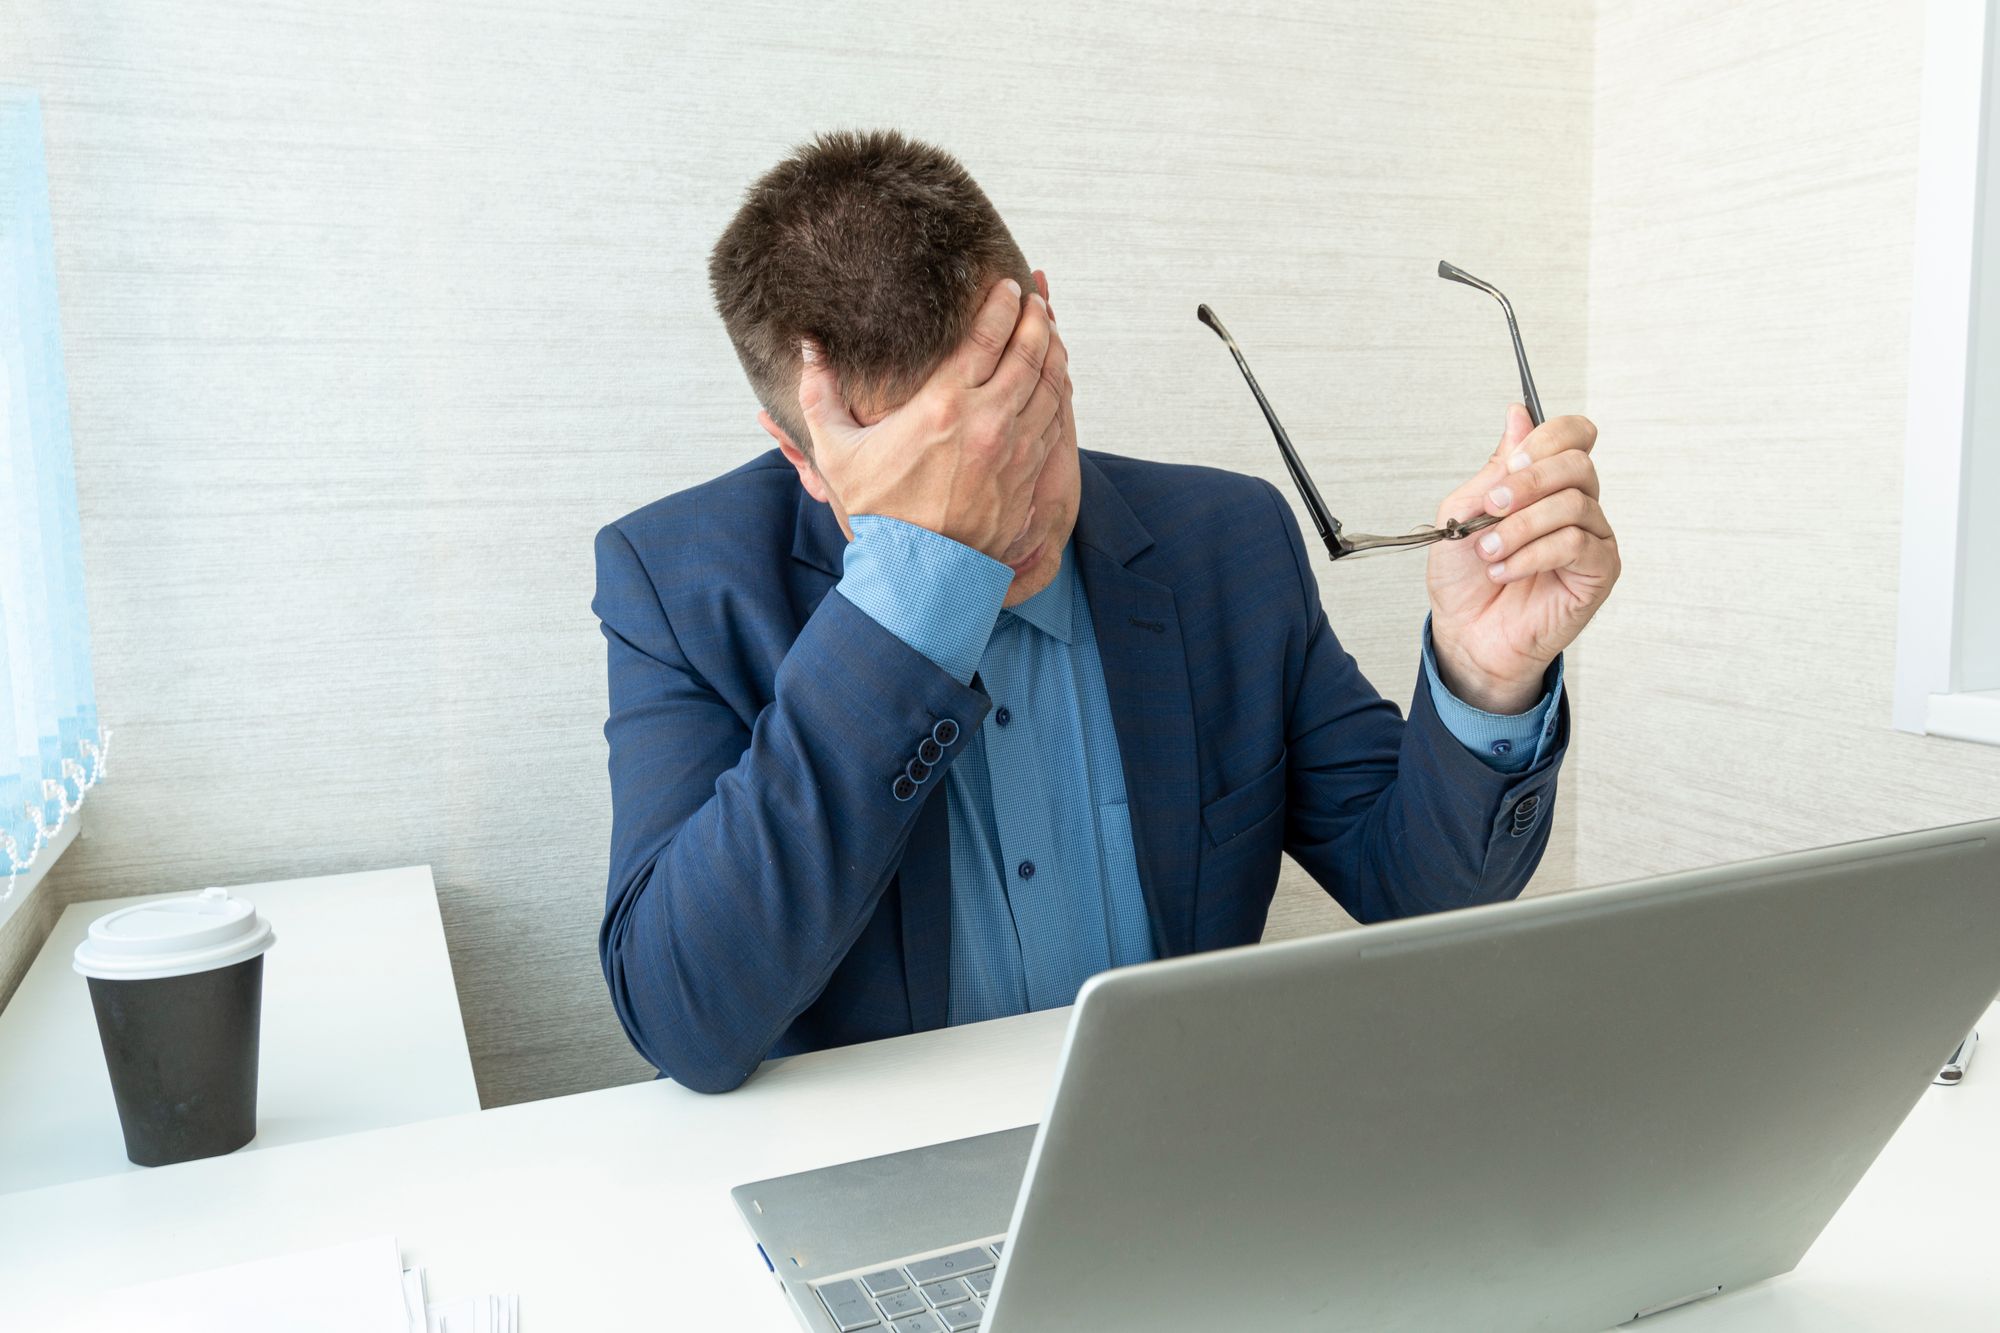 An office worker in front of a laptop, looking worried, taking off their glasses and putting one hand over their face.